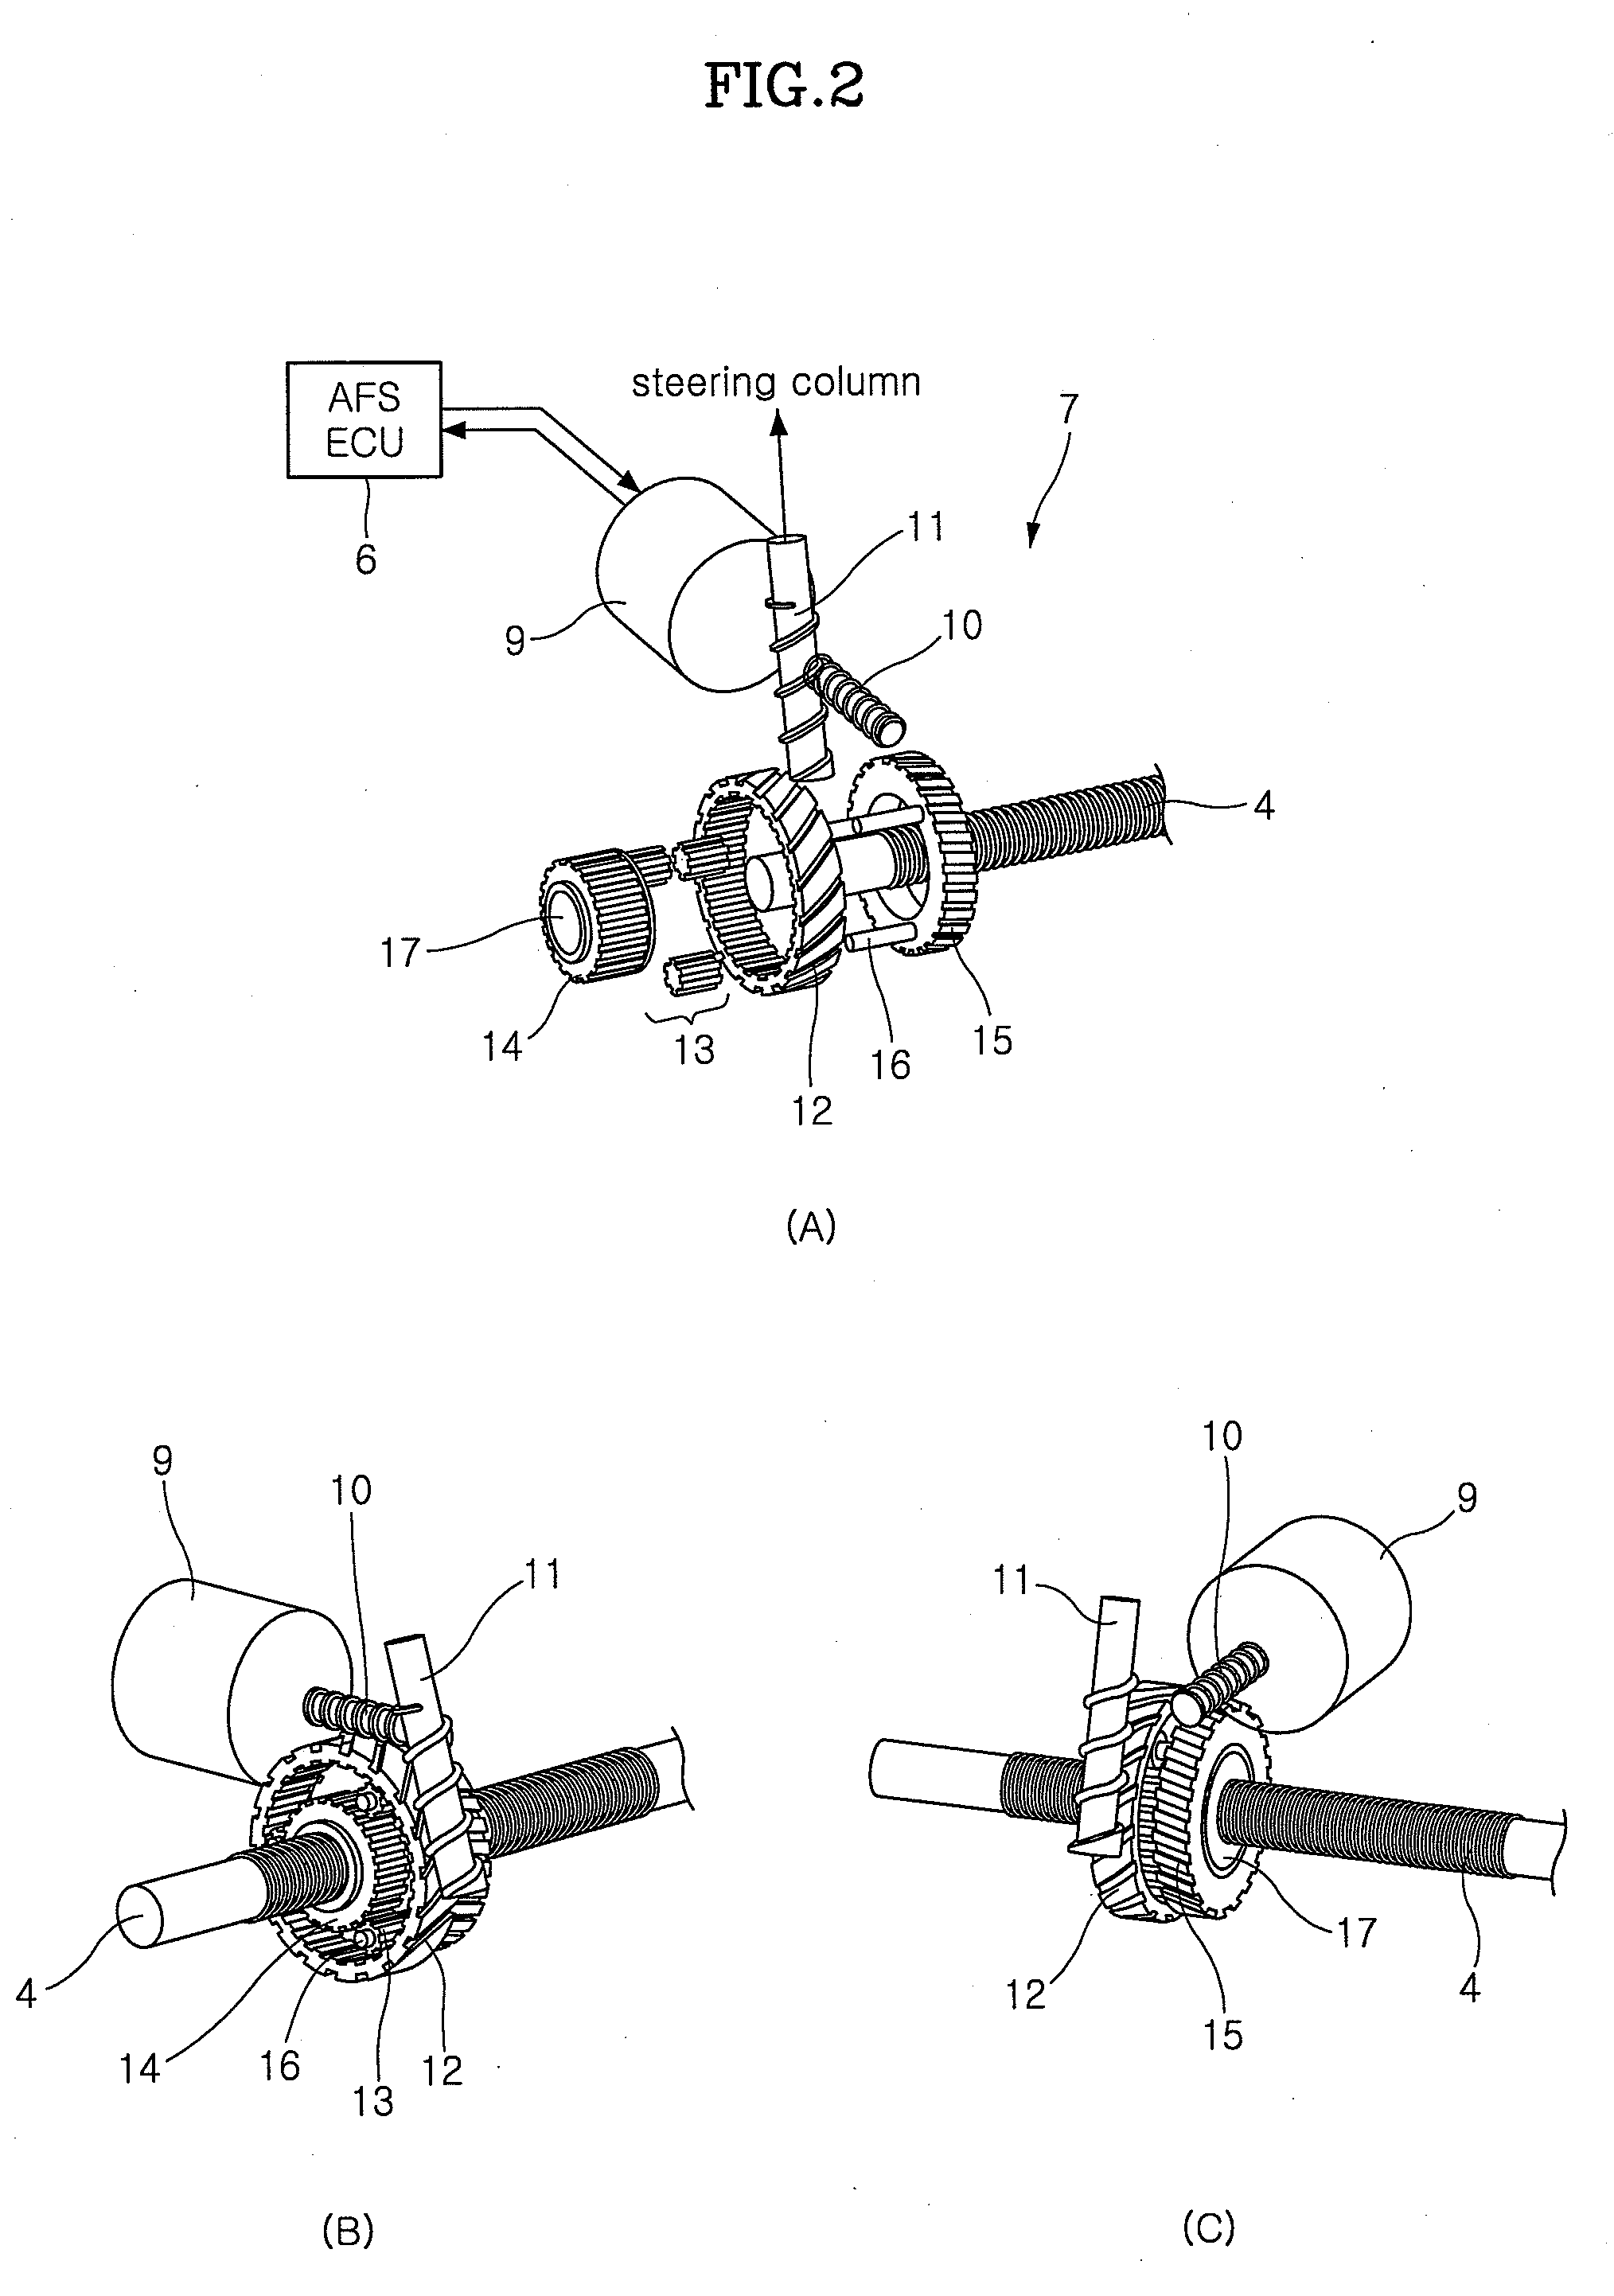 Gear box-typed active front steering system in vehicle